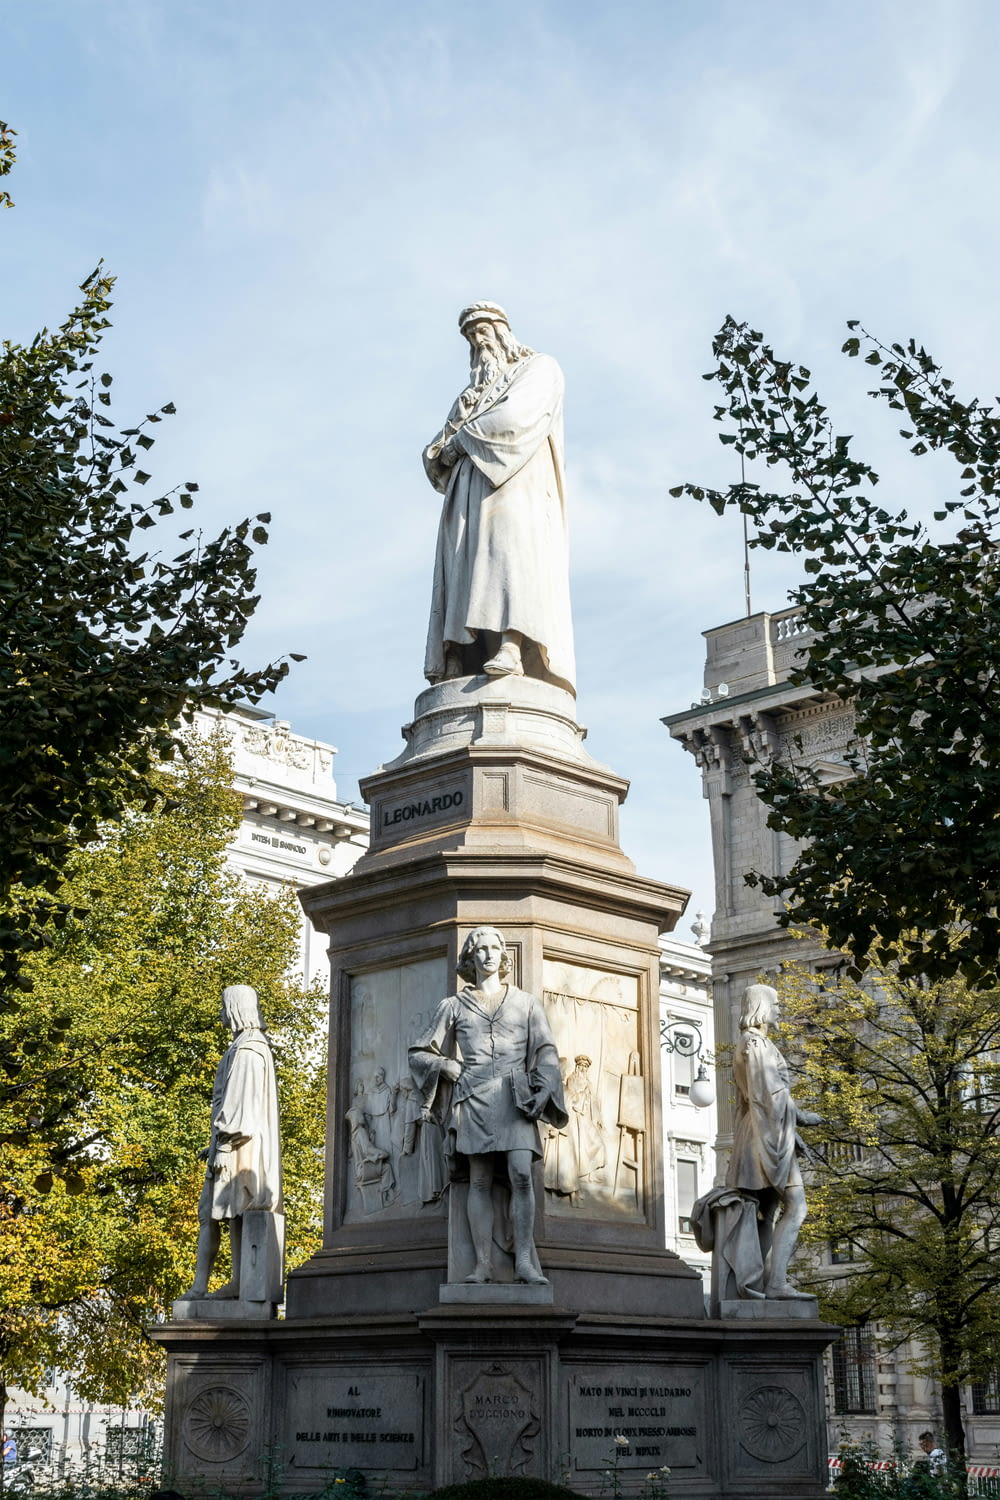 a statue of a man standing next to other statues